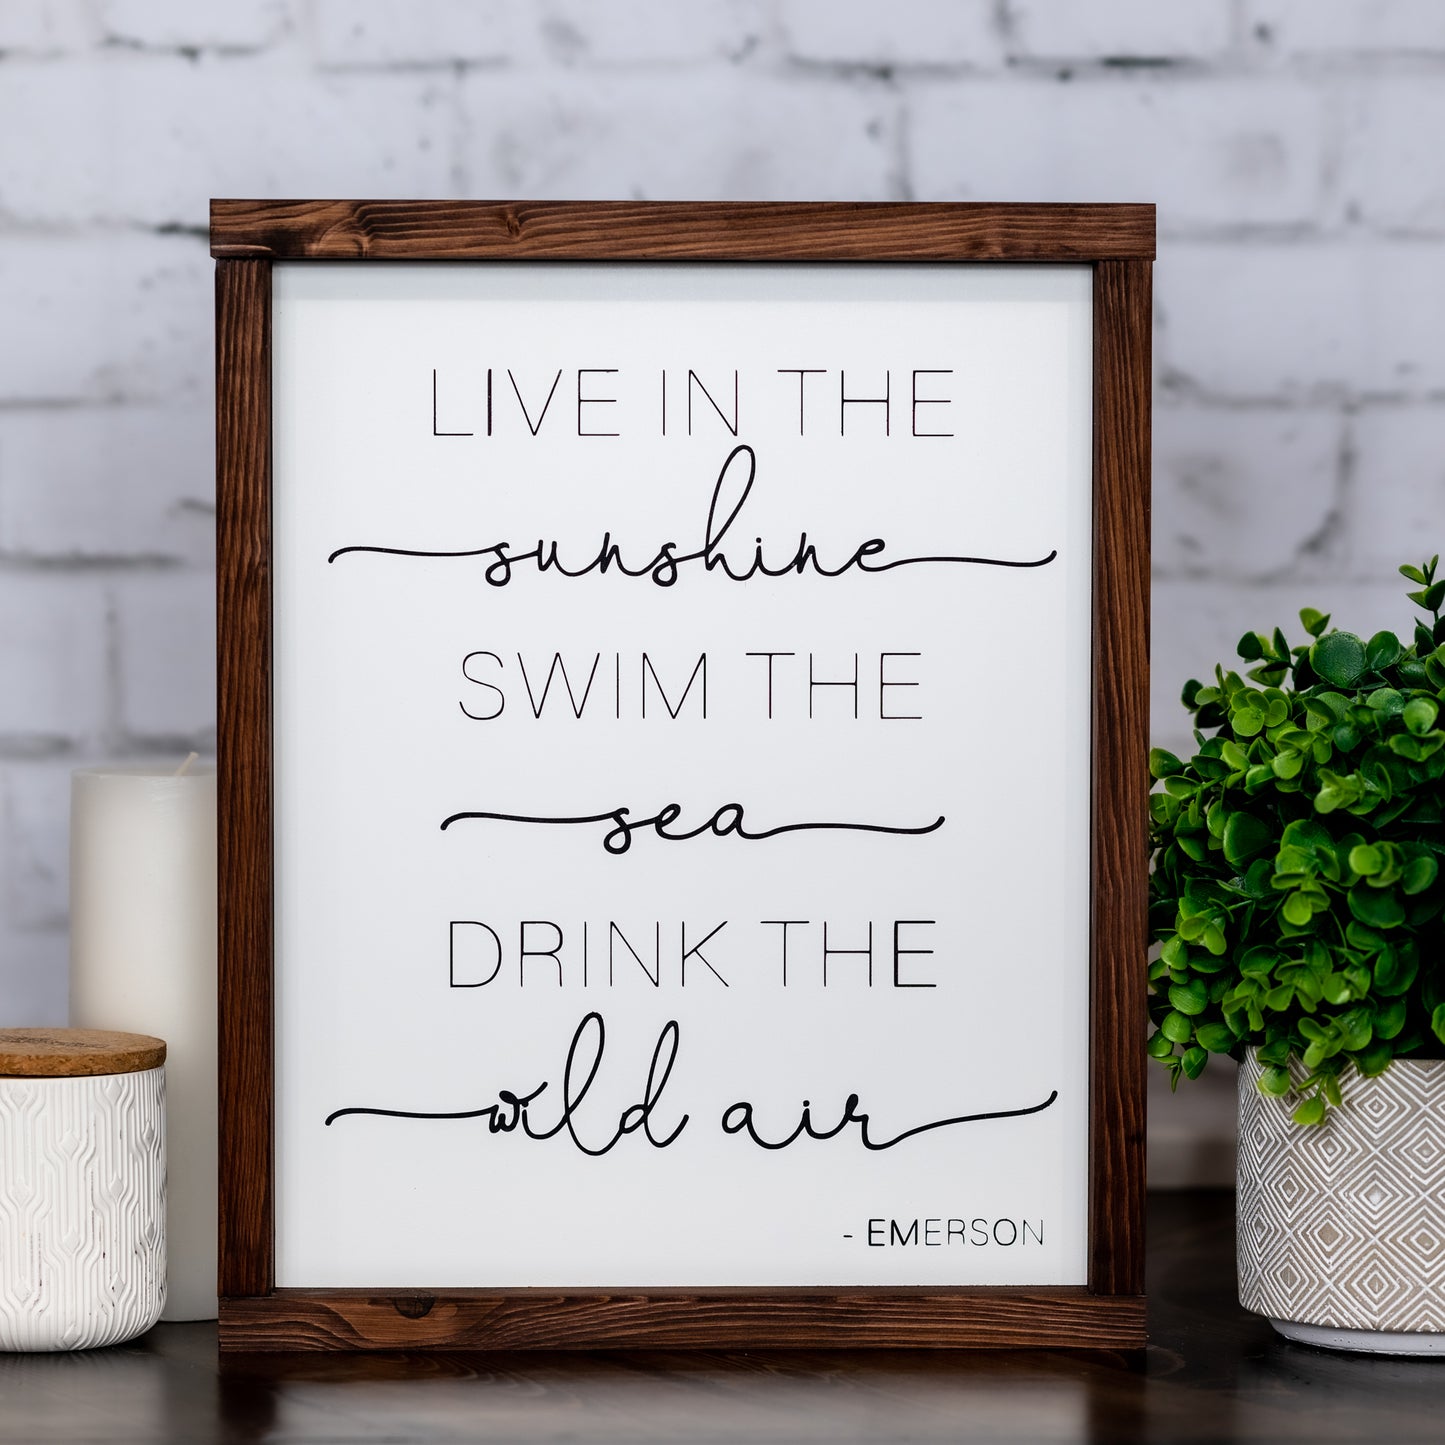 live in the sunshine, swim the sea, drink the wild air - emerson ~ wood sign